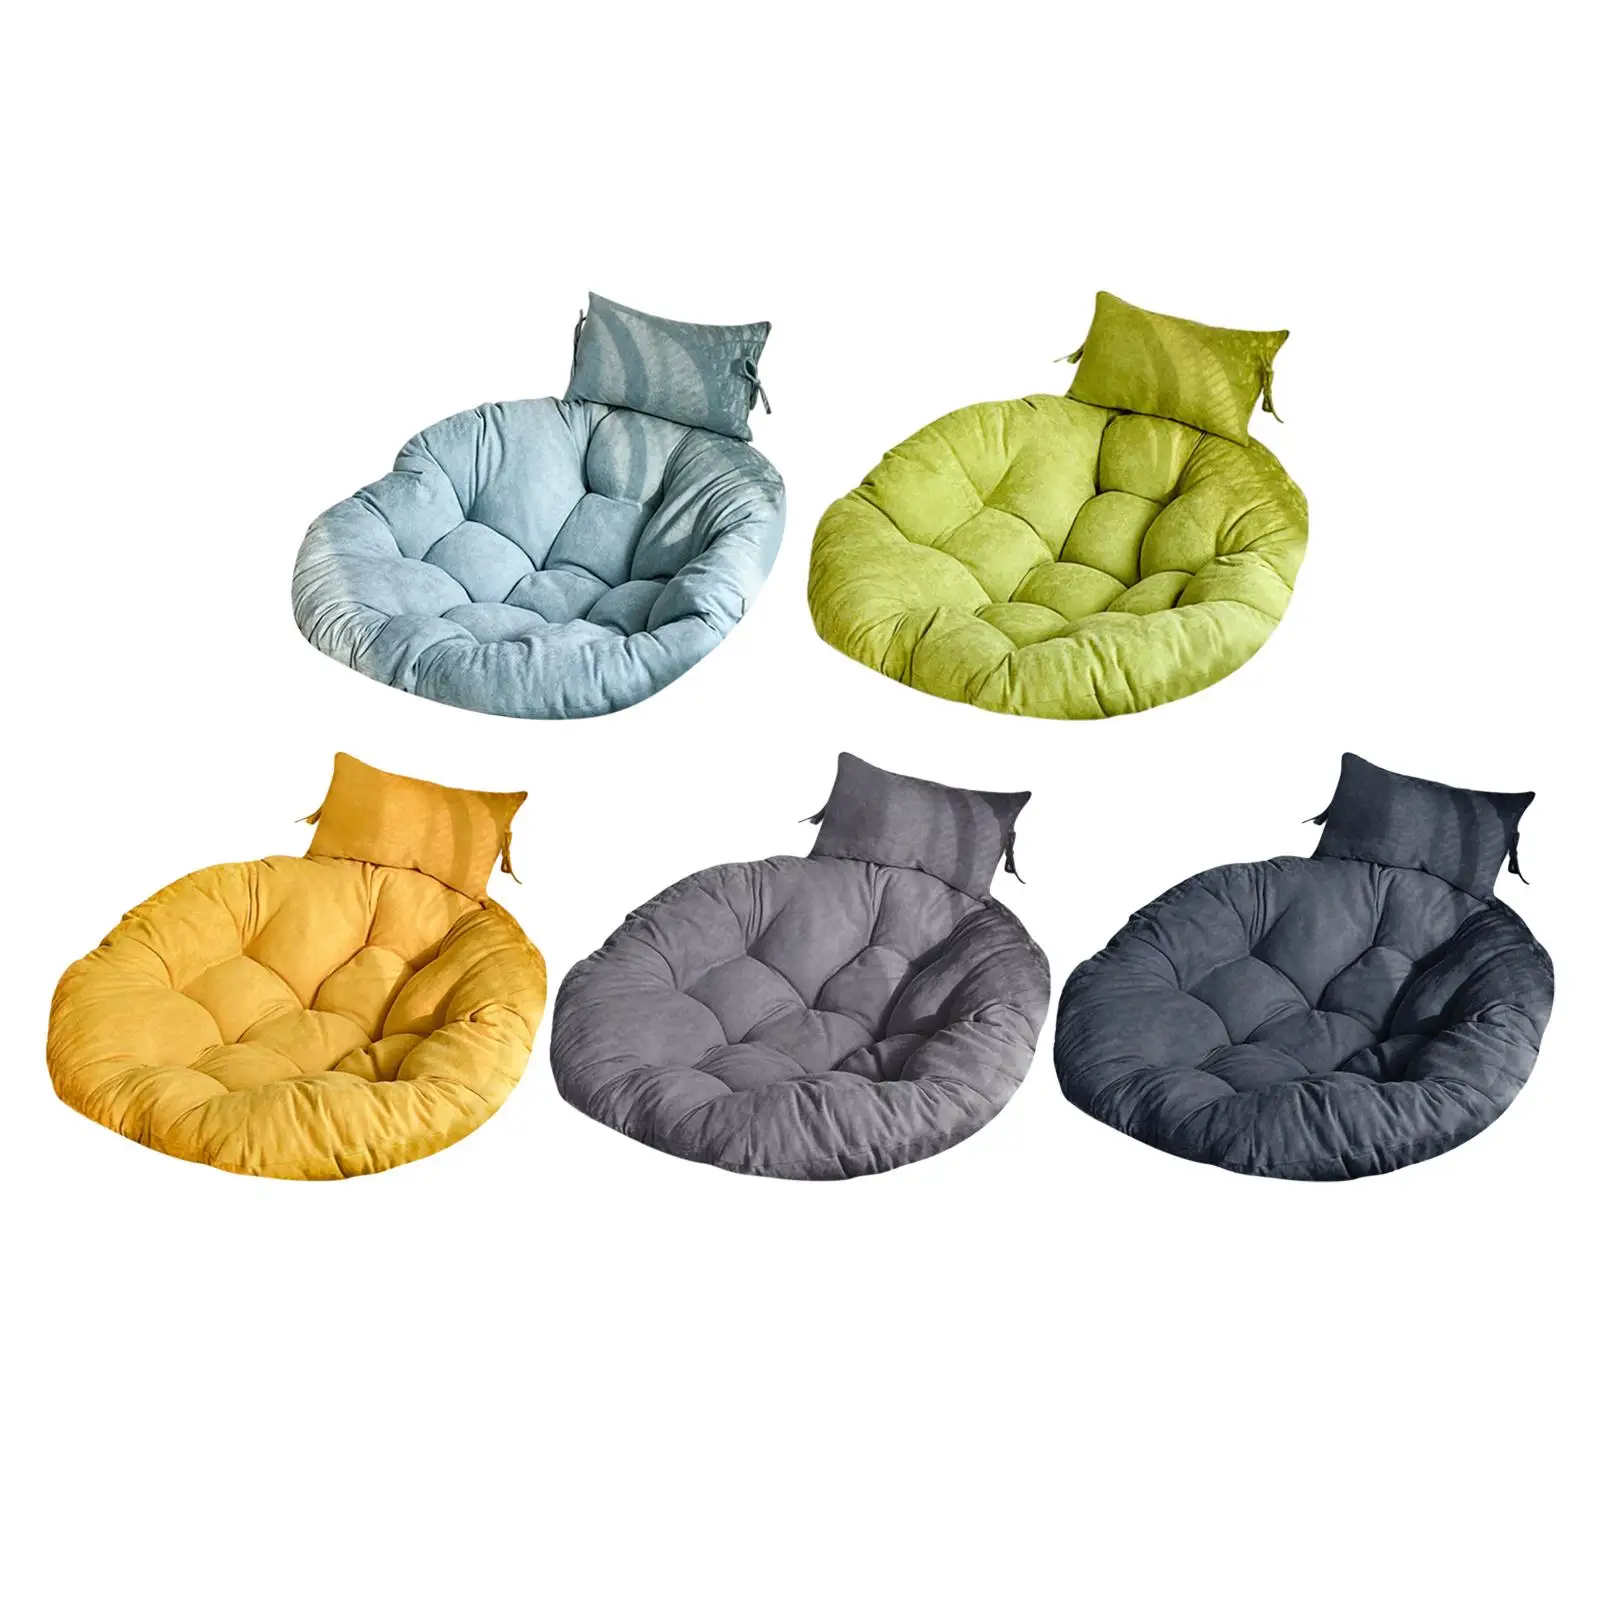 Thick Egg Chair Cushion with Headrest Multifunctional 12cm Thick Filling Diameter 105cm for Hammock Chair Durable Accessory